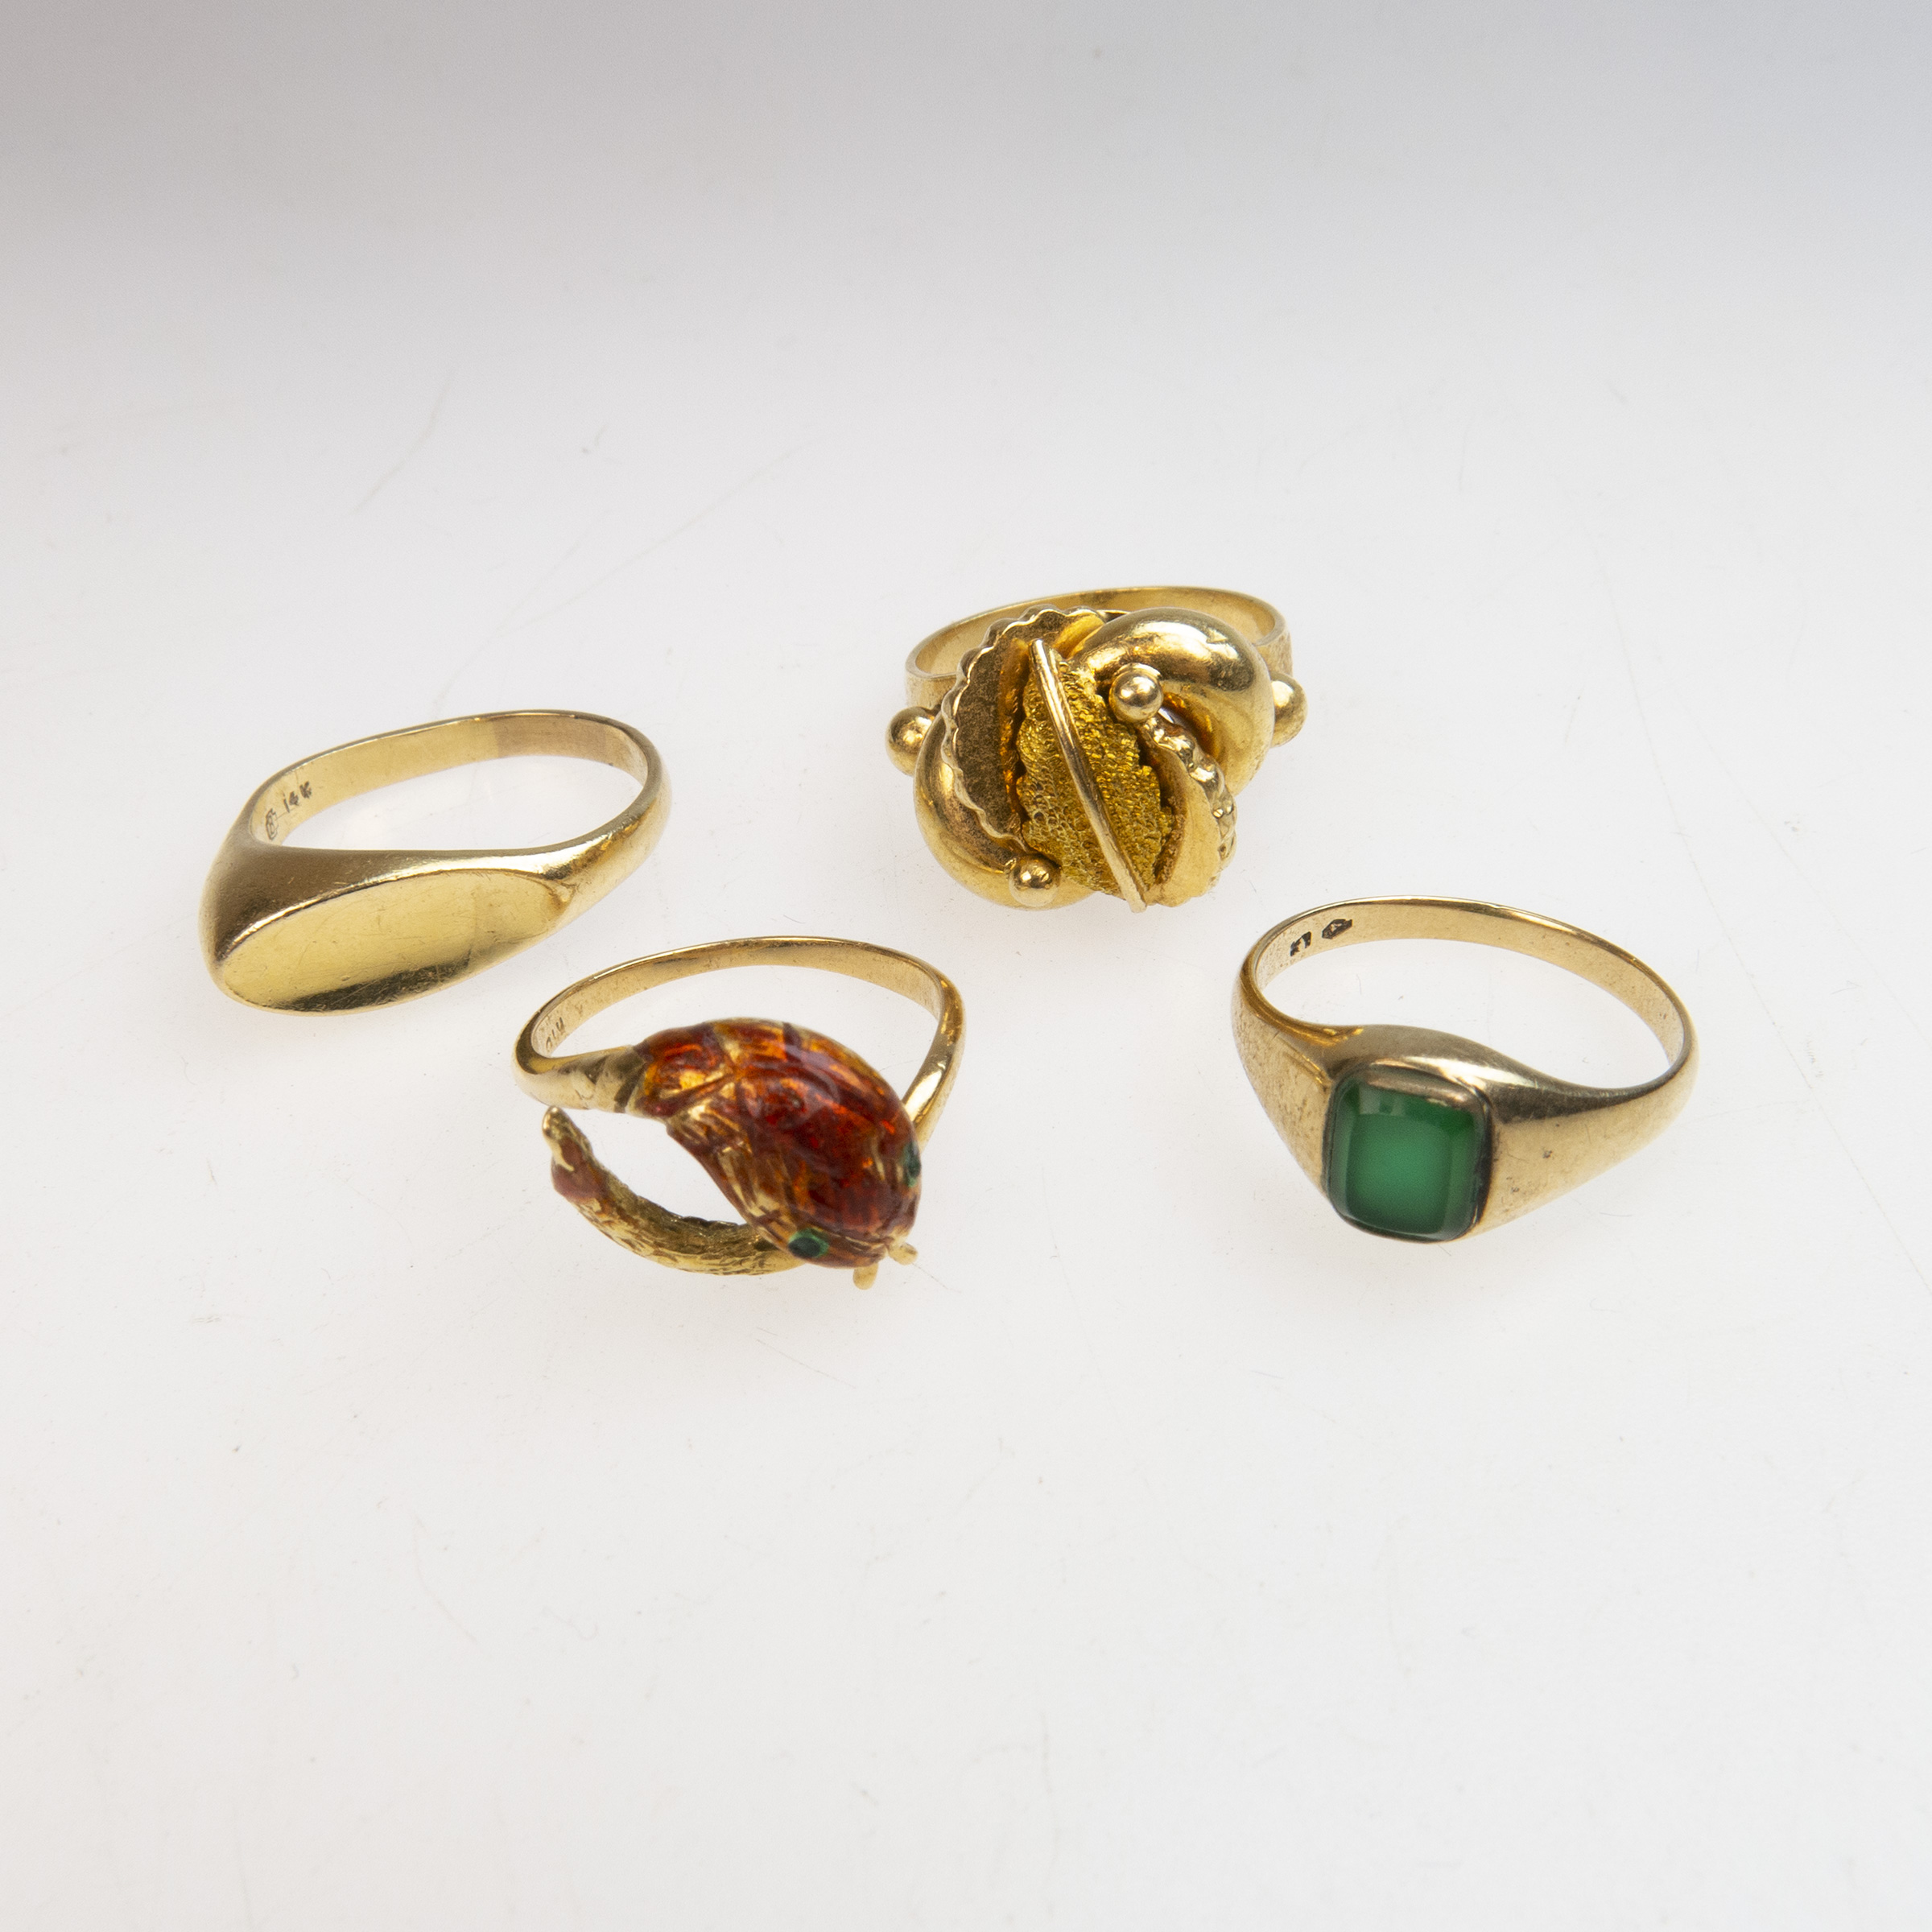 2 x 18k and 2 x 14k Yellow Gold Rings